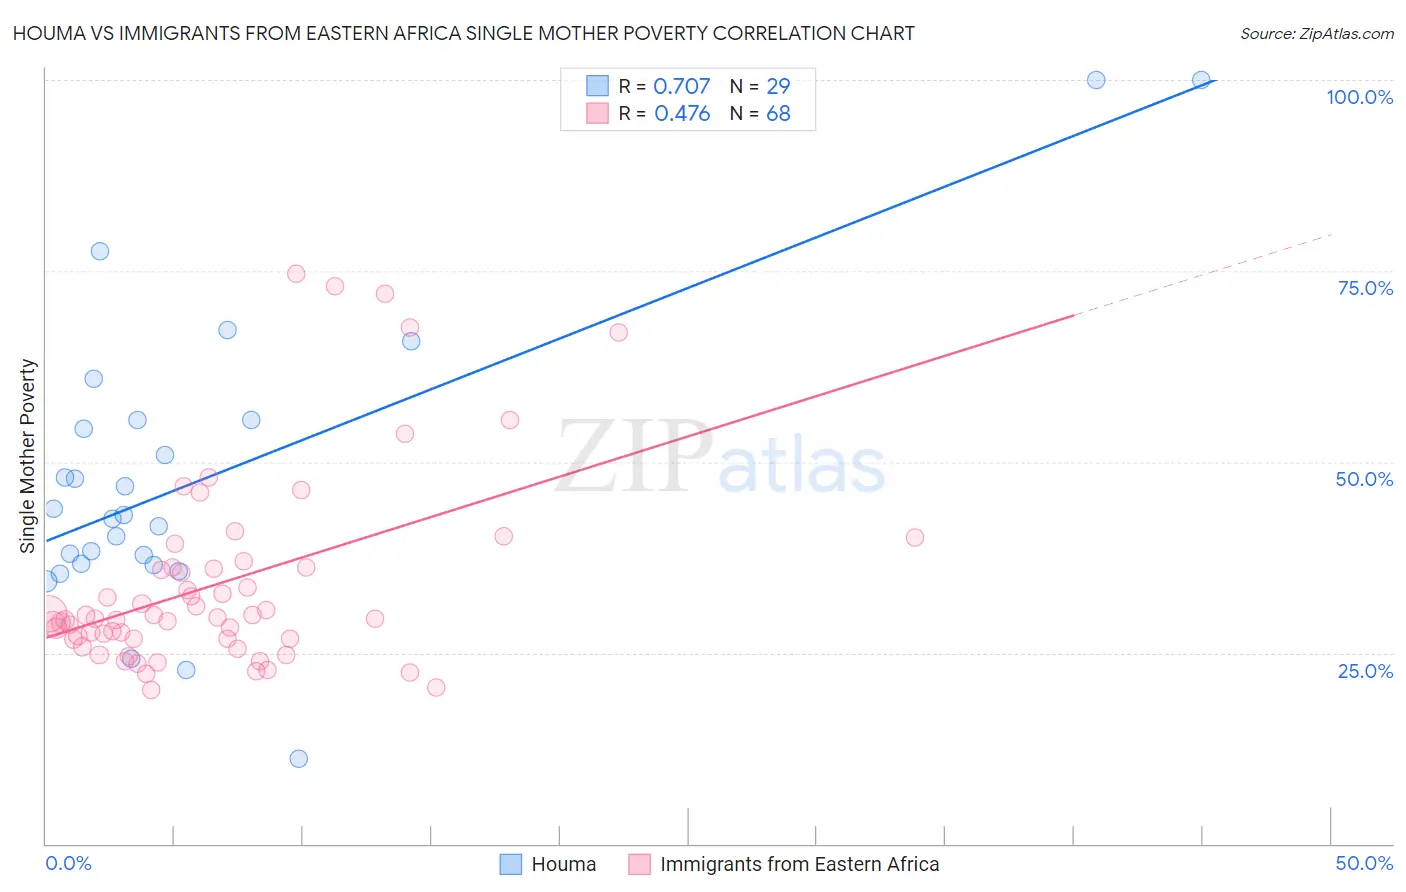 Houma vs Immigrants from Eastern Africa Single Mother Poverty